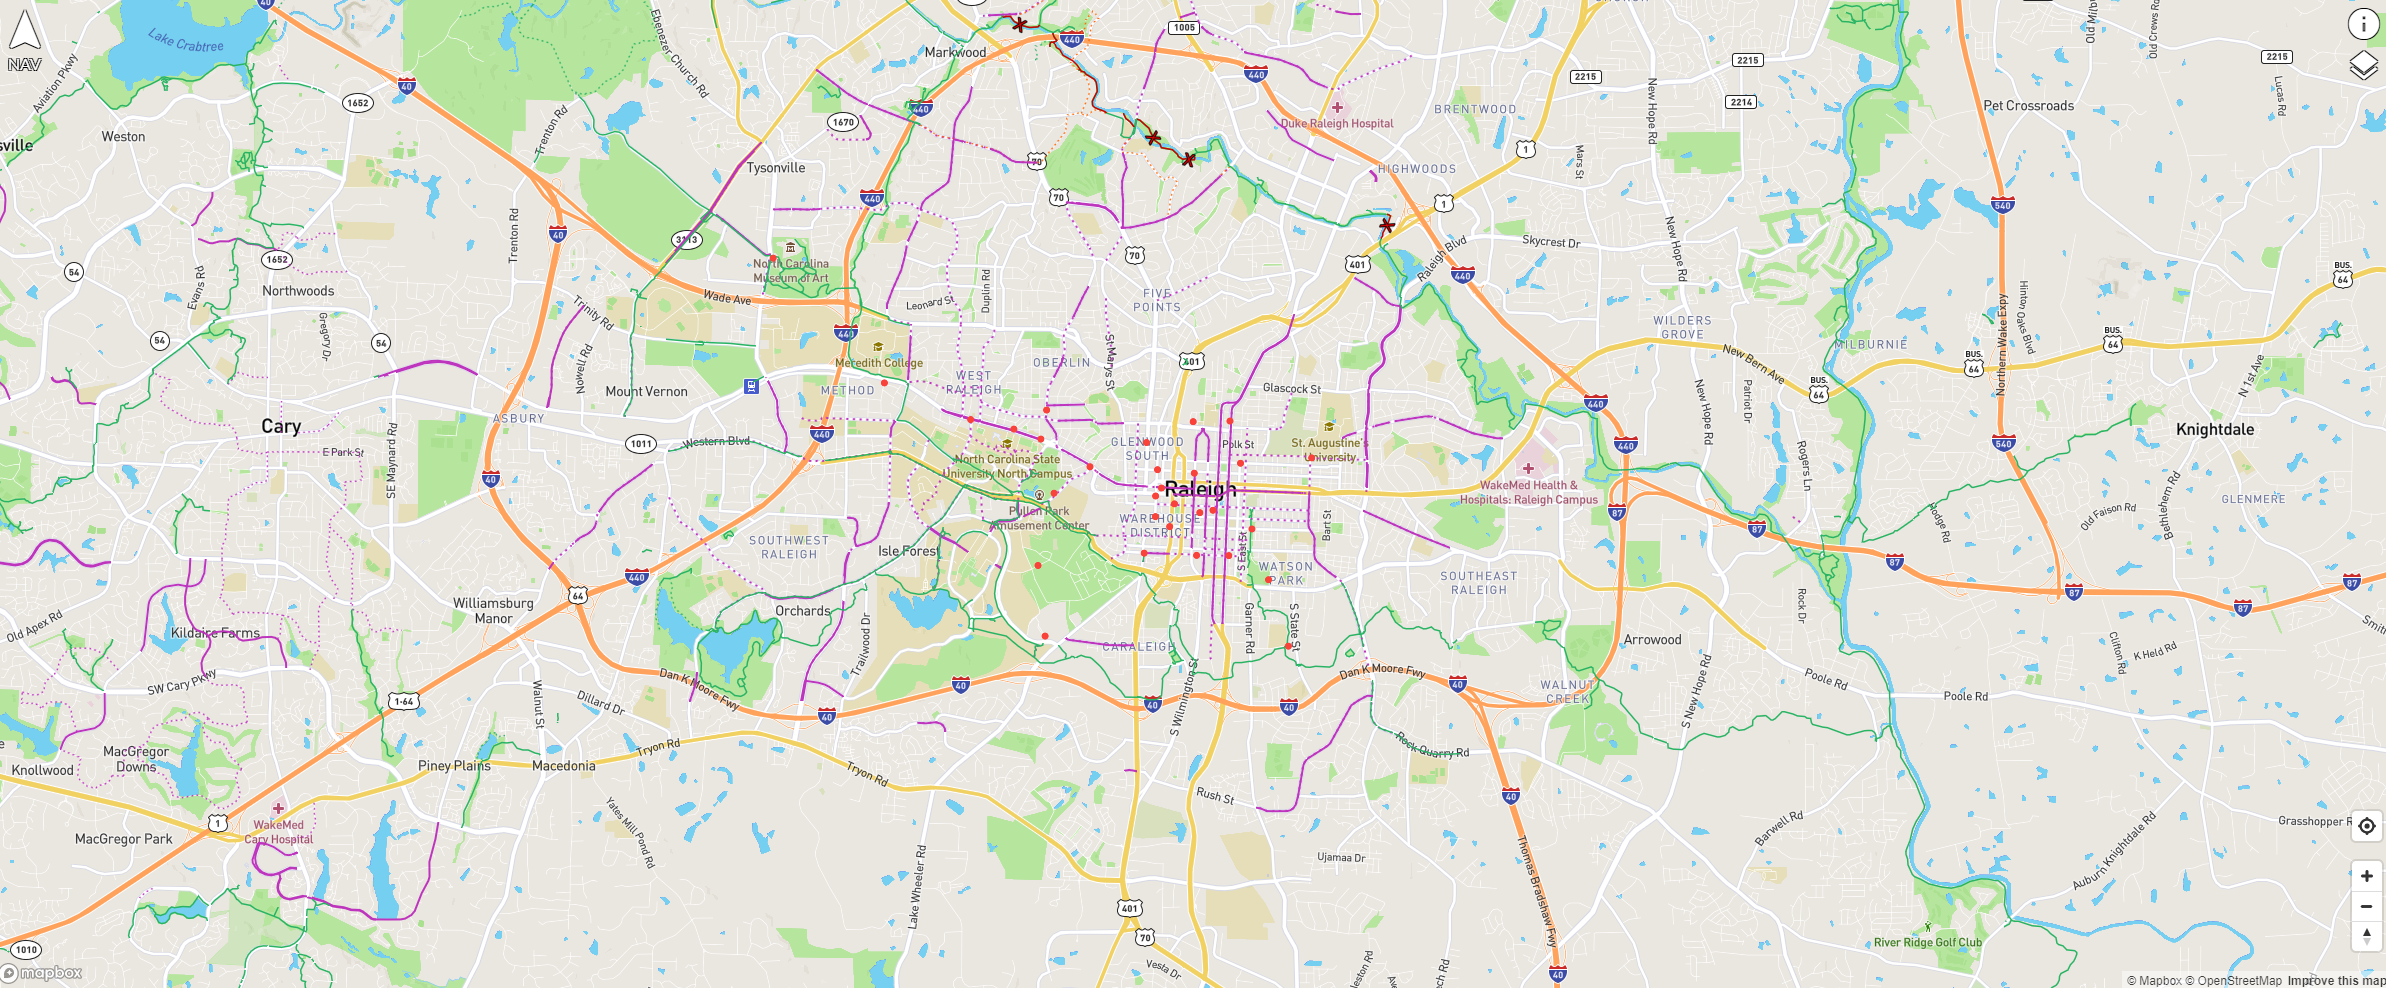 An Online Bike Map to Get Around the Triangle